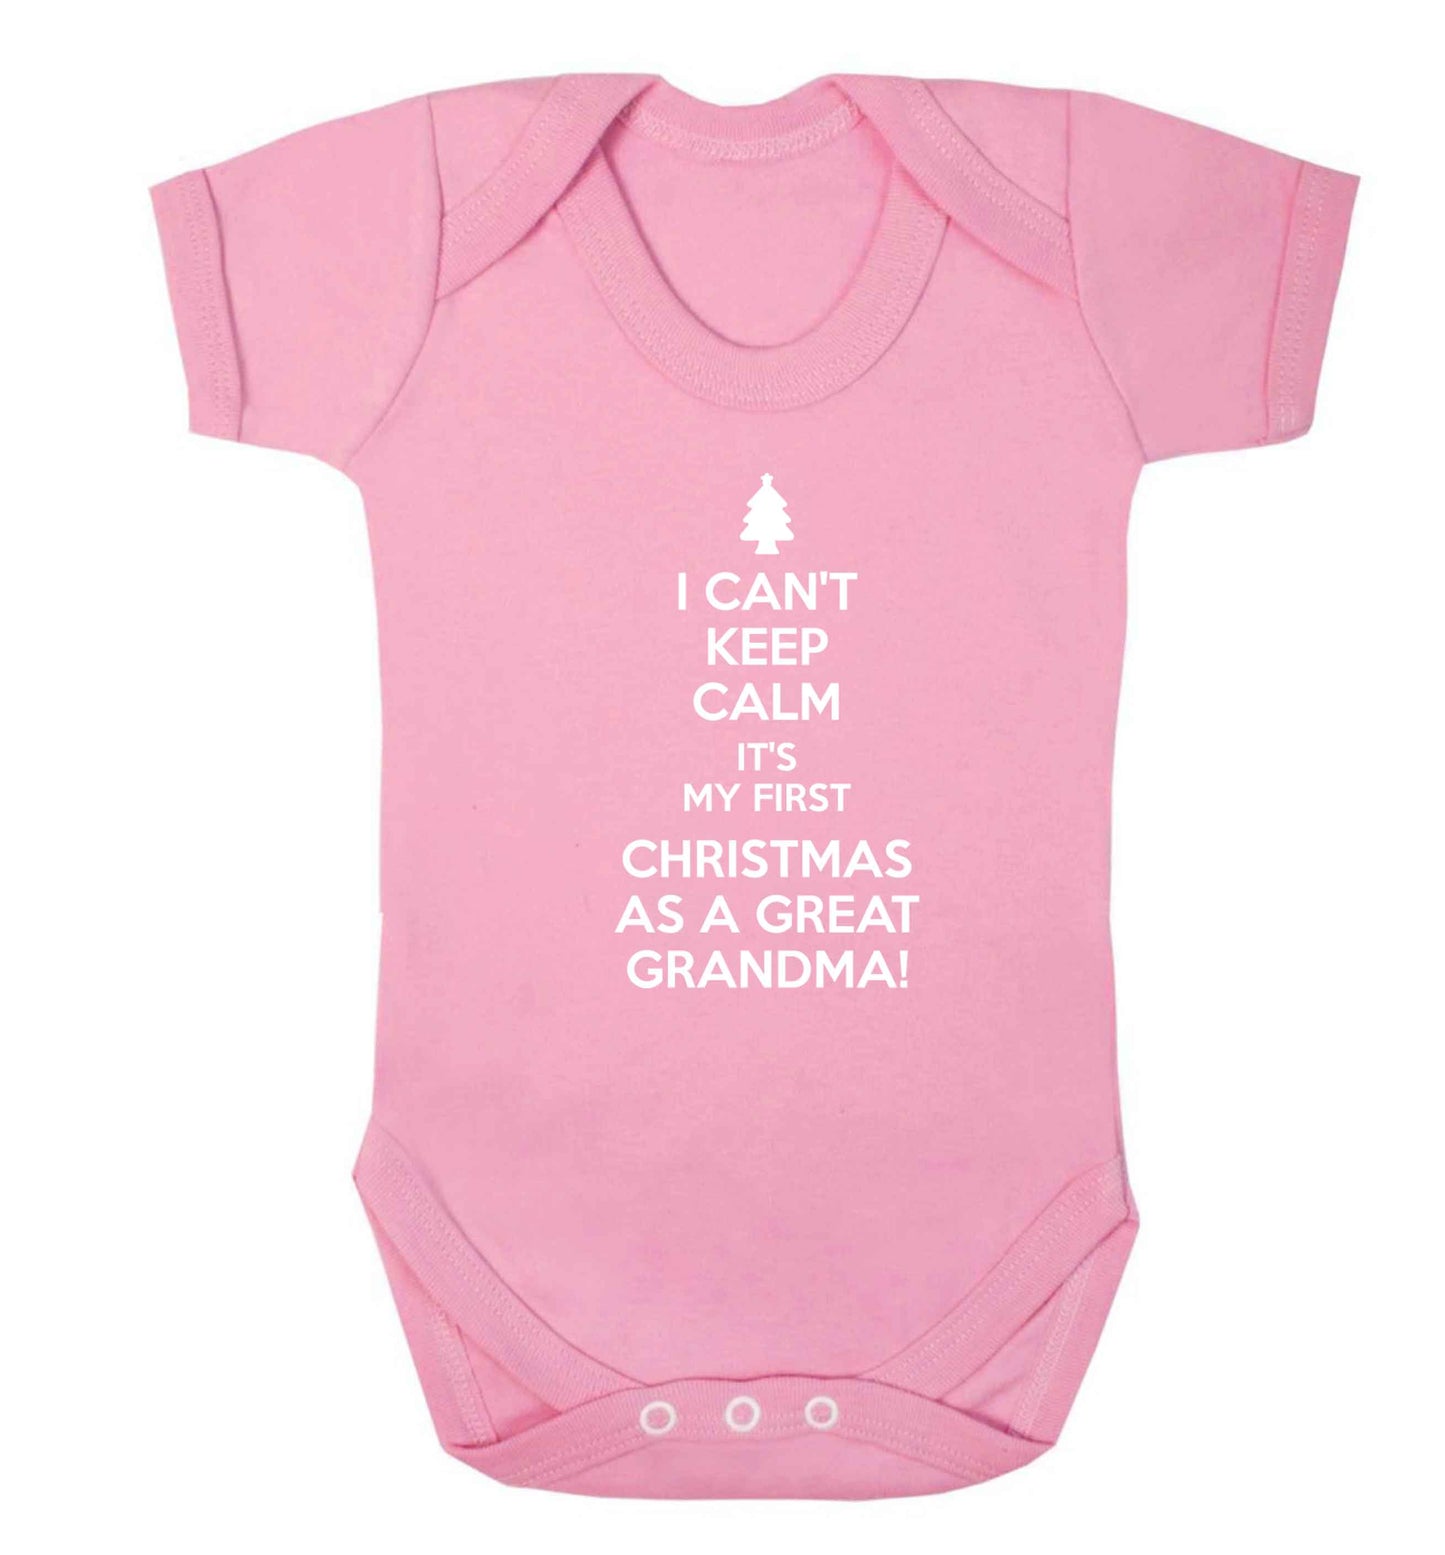 I can't keep calm it's my first Christmas as a great grandma! Baby Vest pale pink 18-24 months